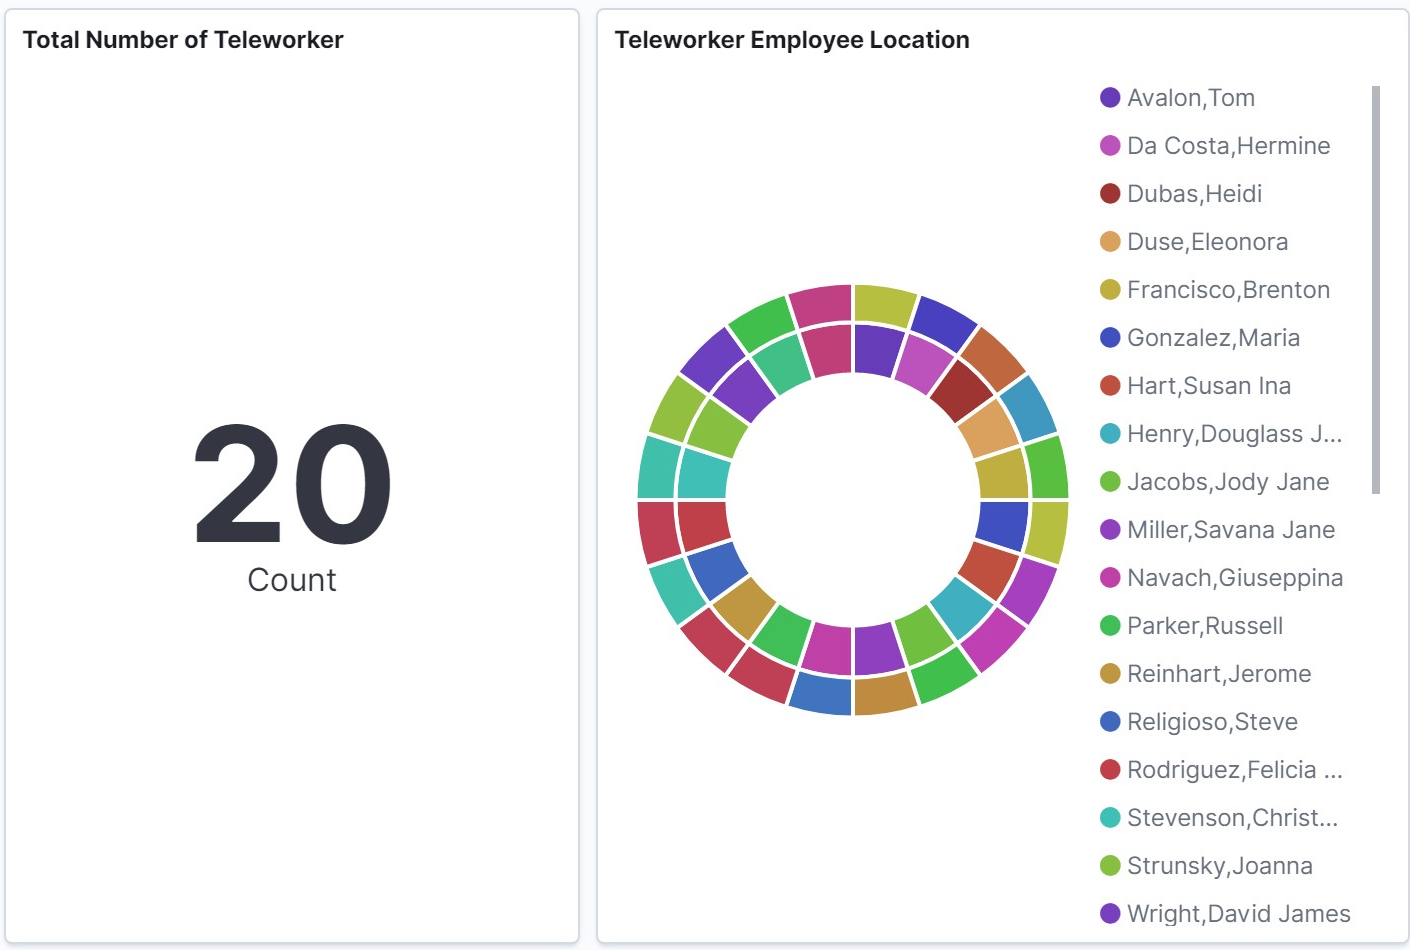 Kibana Dashboard HCM Teleworker Count and Location